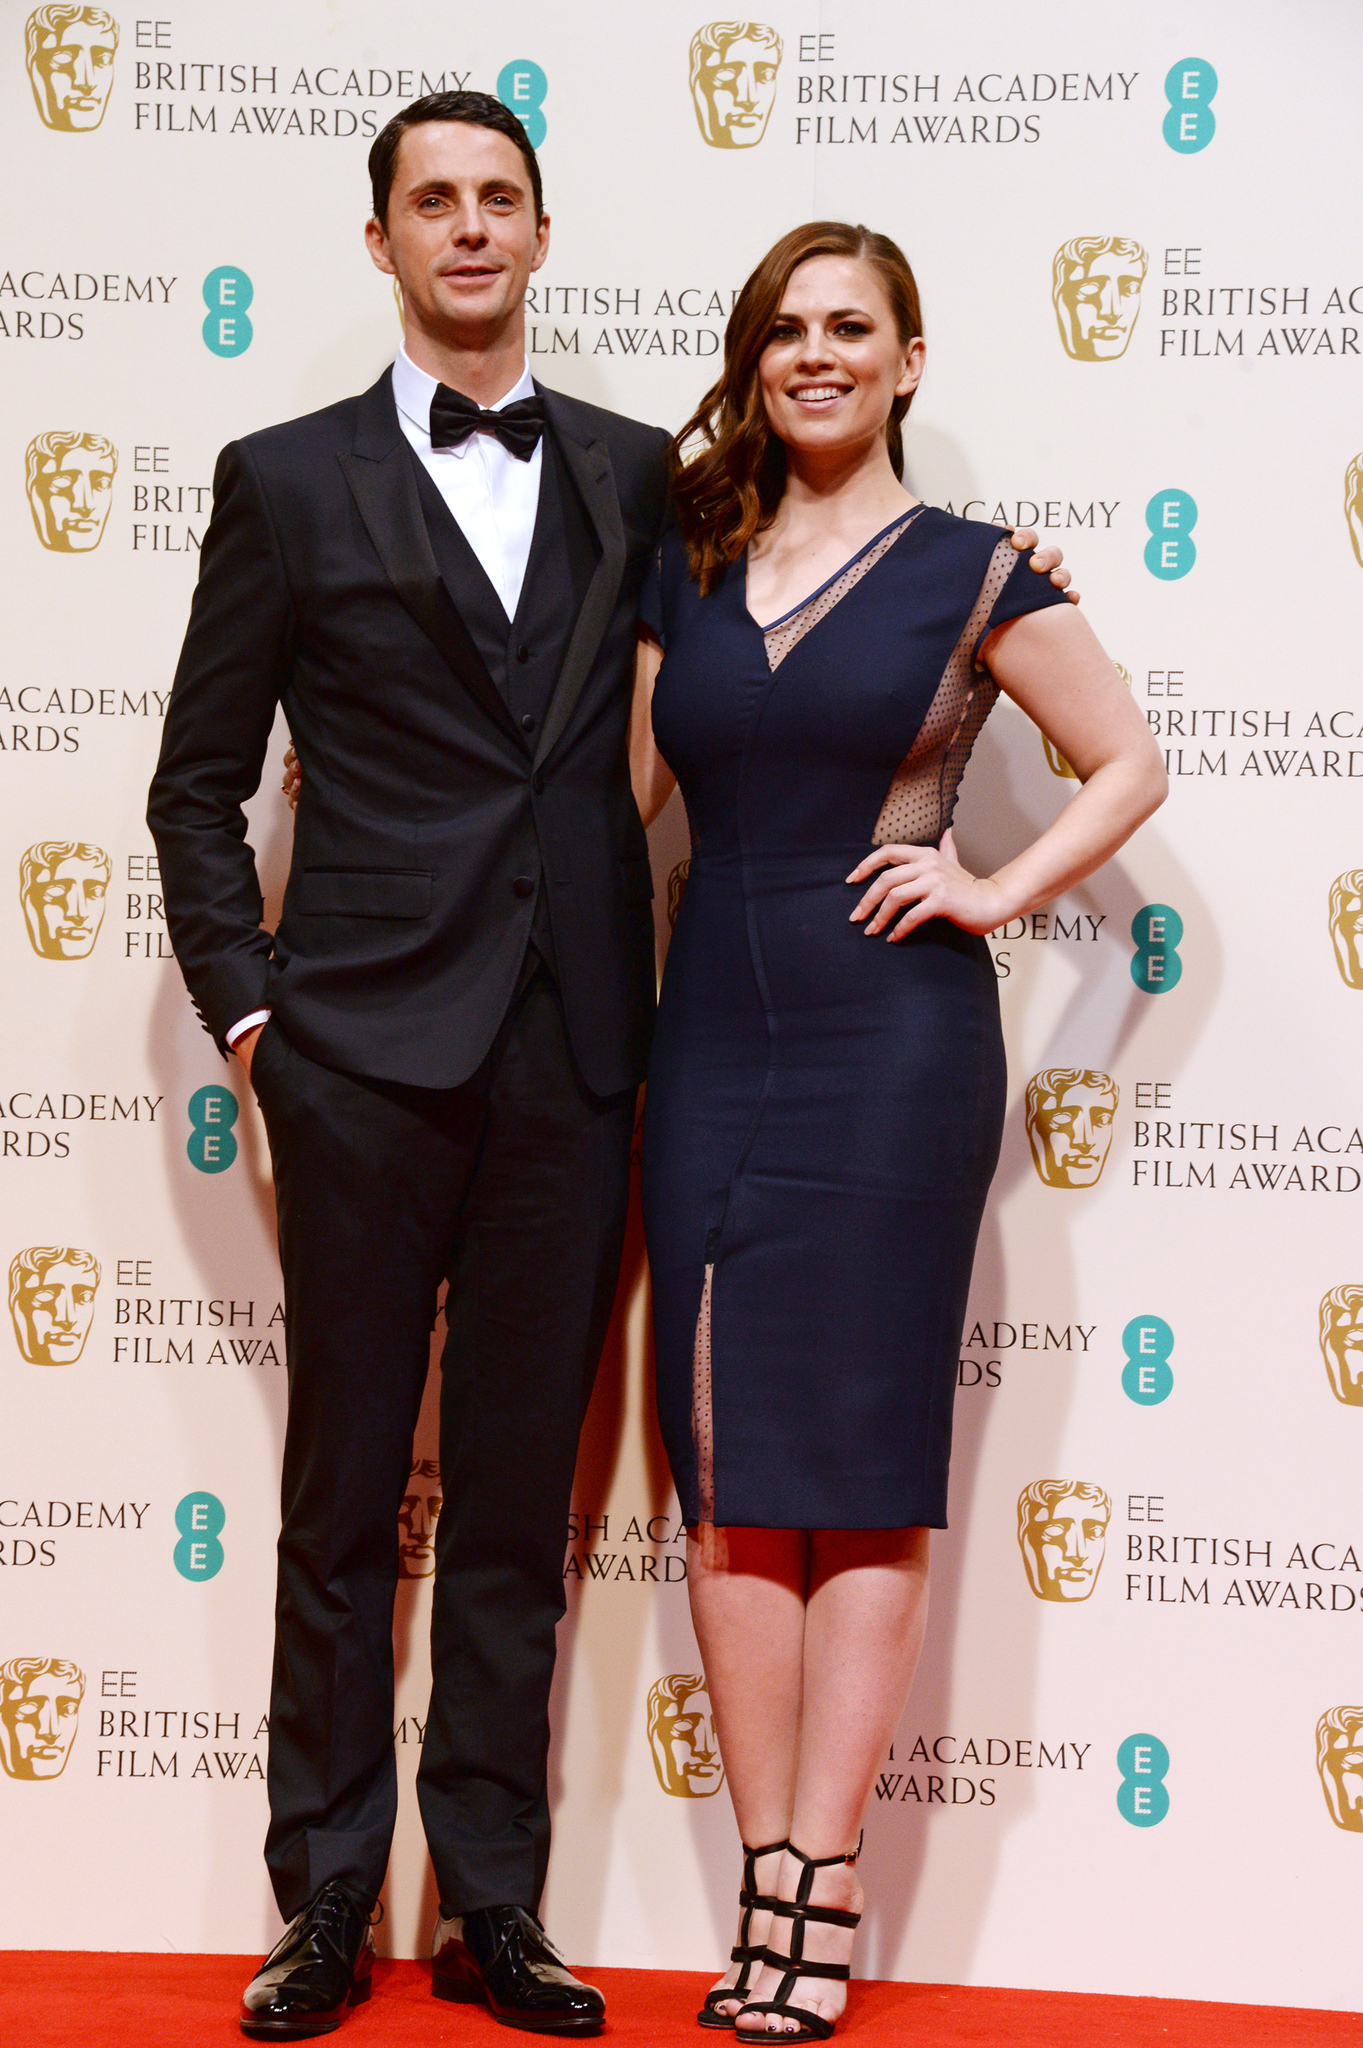 Matthew Goode and Hayley Atwell